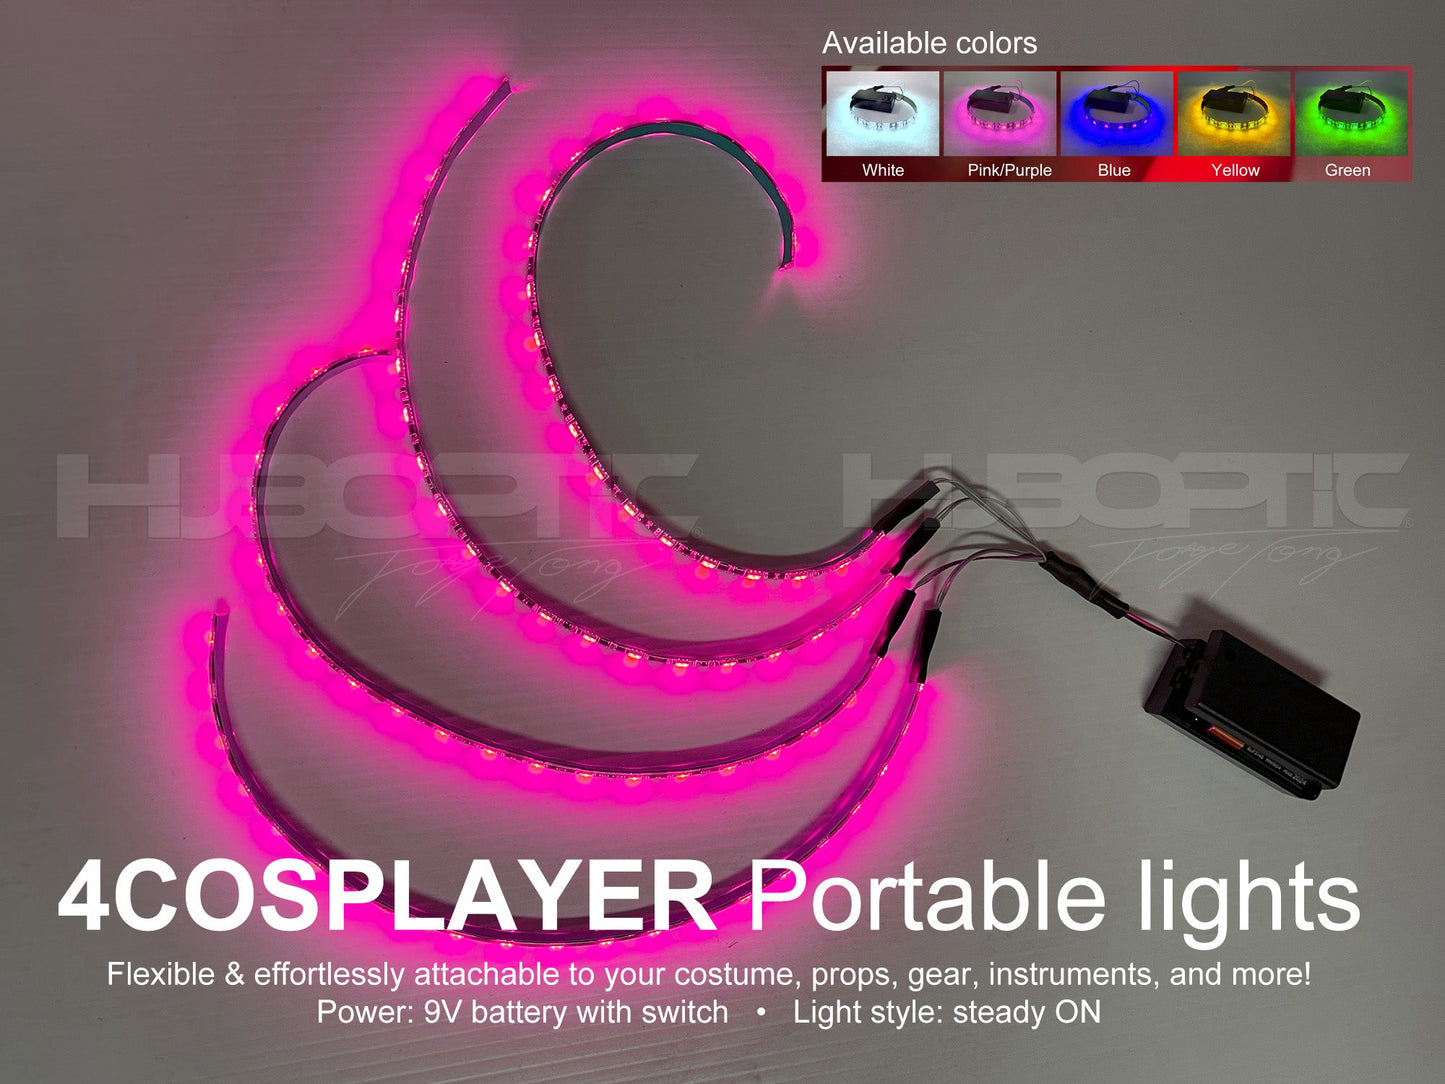 4Cosplayer portable lights Steady ON switch for Light Up Clothing Cosplayer Costume Party HUBOPTIC® Portable DIY lights ledcuts5000